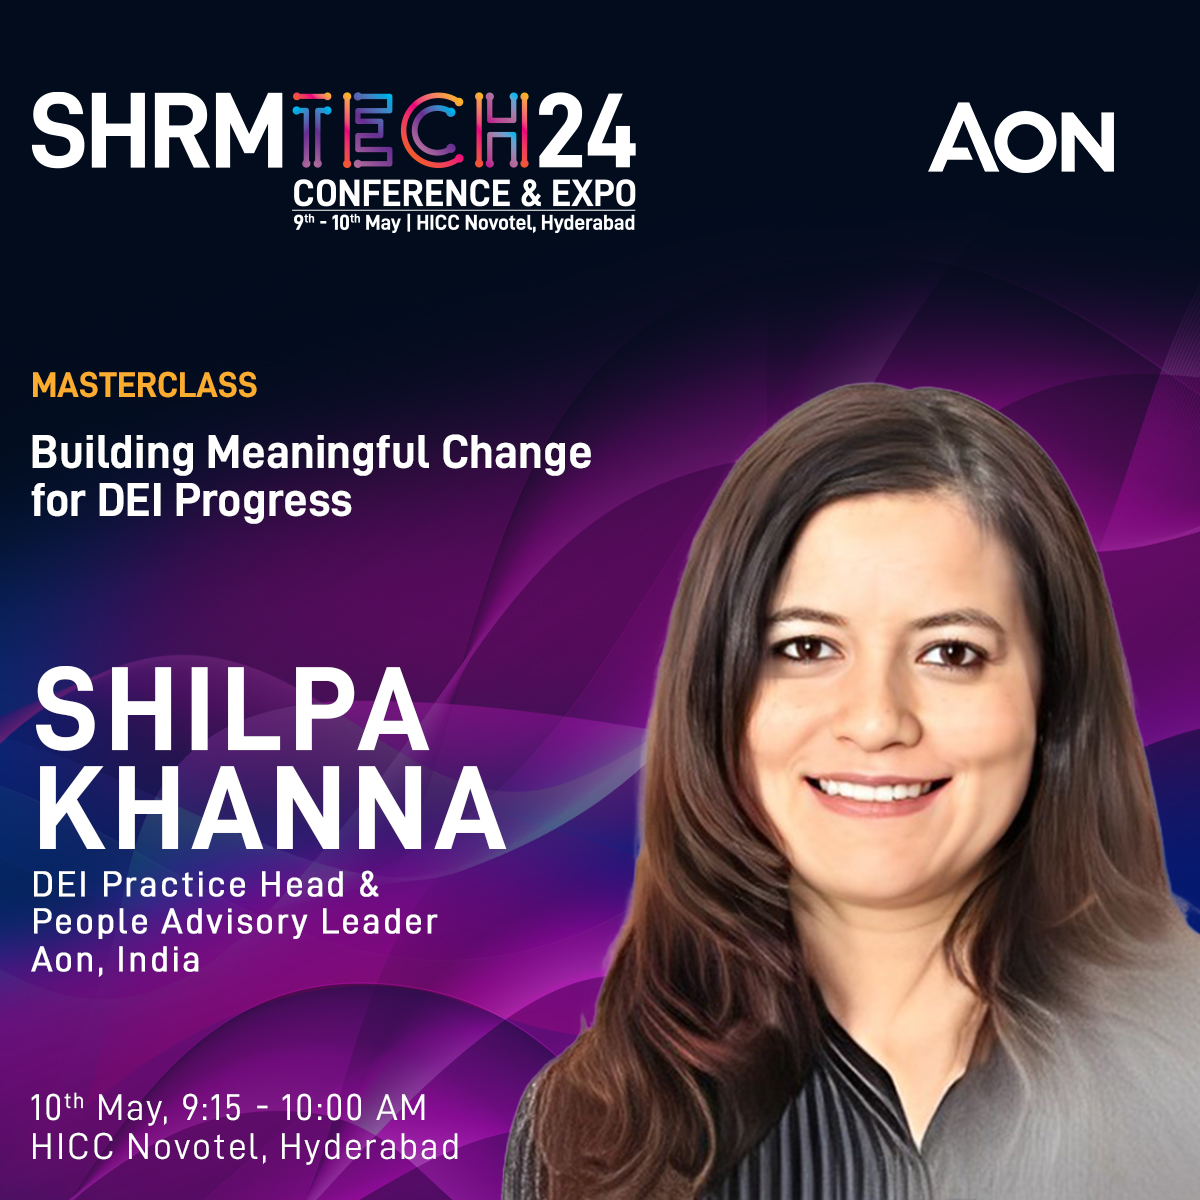 Excited to announce our upcoming session on 'Building Meaningful Change for DEI Progress' in partnership with Aon. We're privileged to have Shilpa Khanna, DEI Practice Head & People Advisory Leader at Aon, India, leading the discussion. Join us to gain valuable insights and…